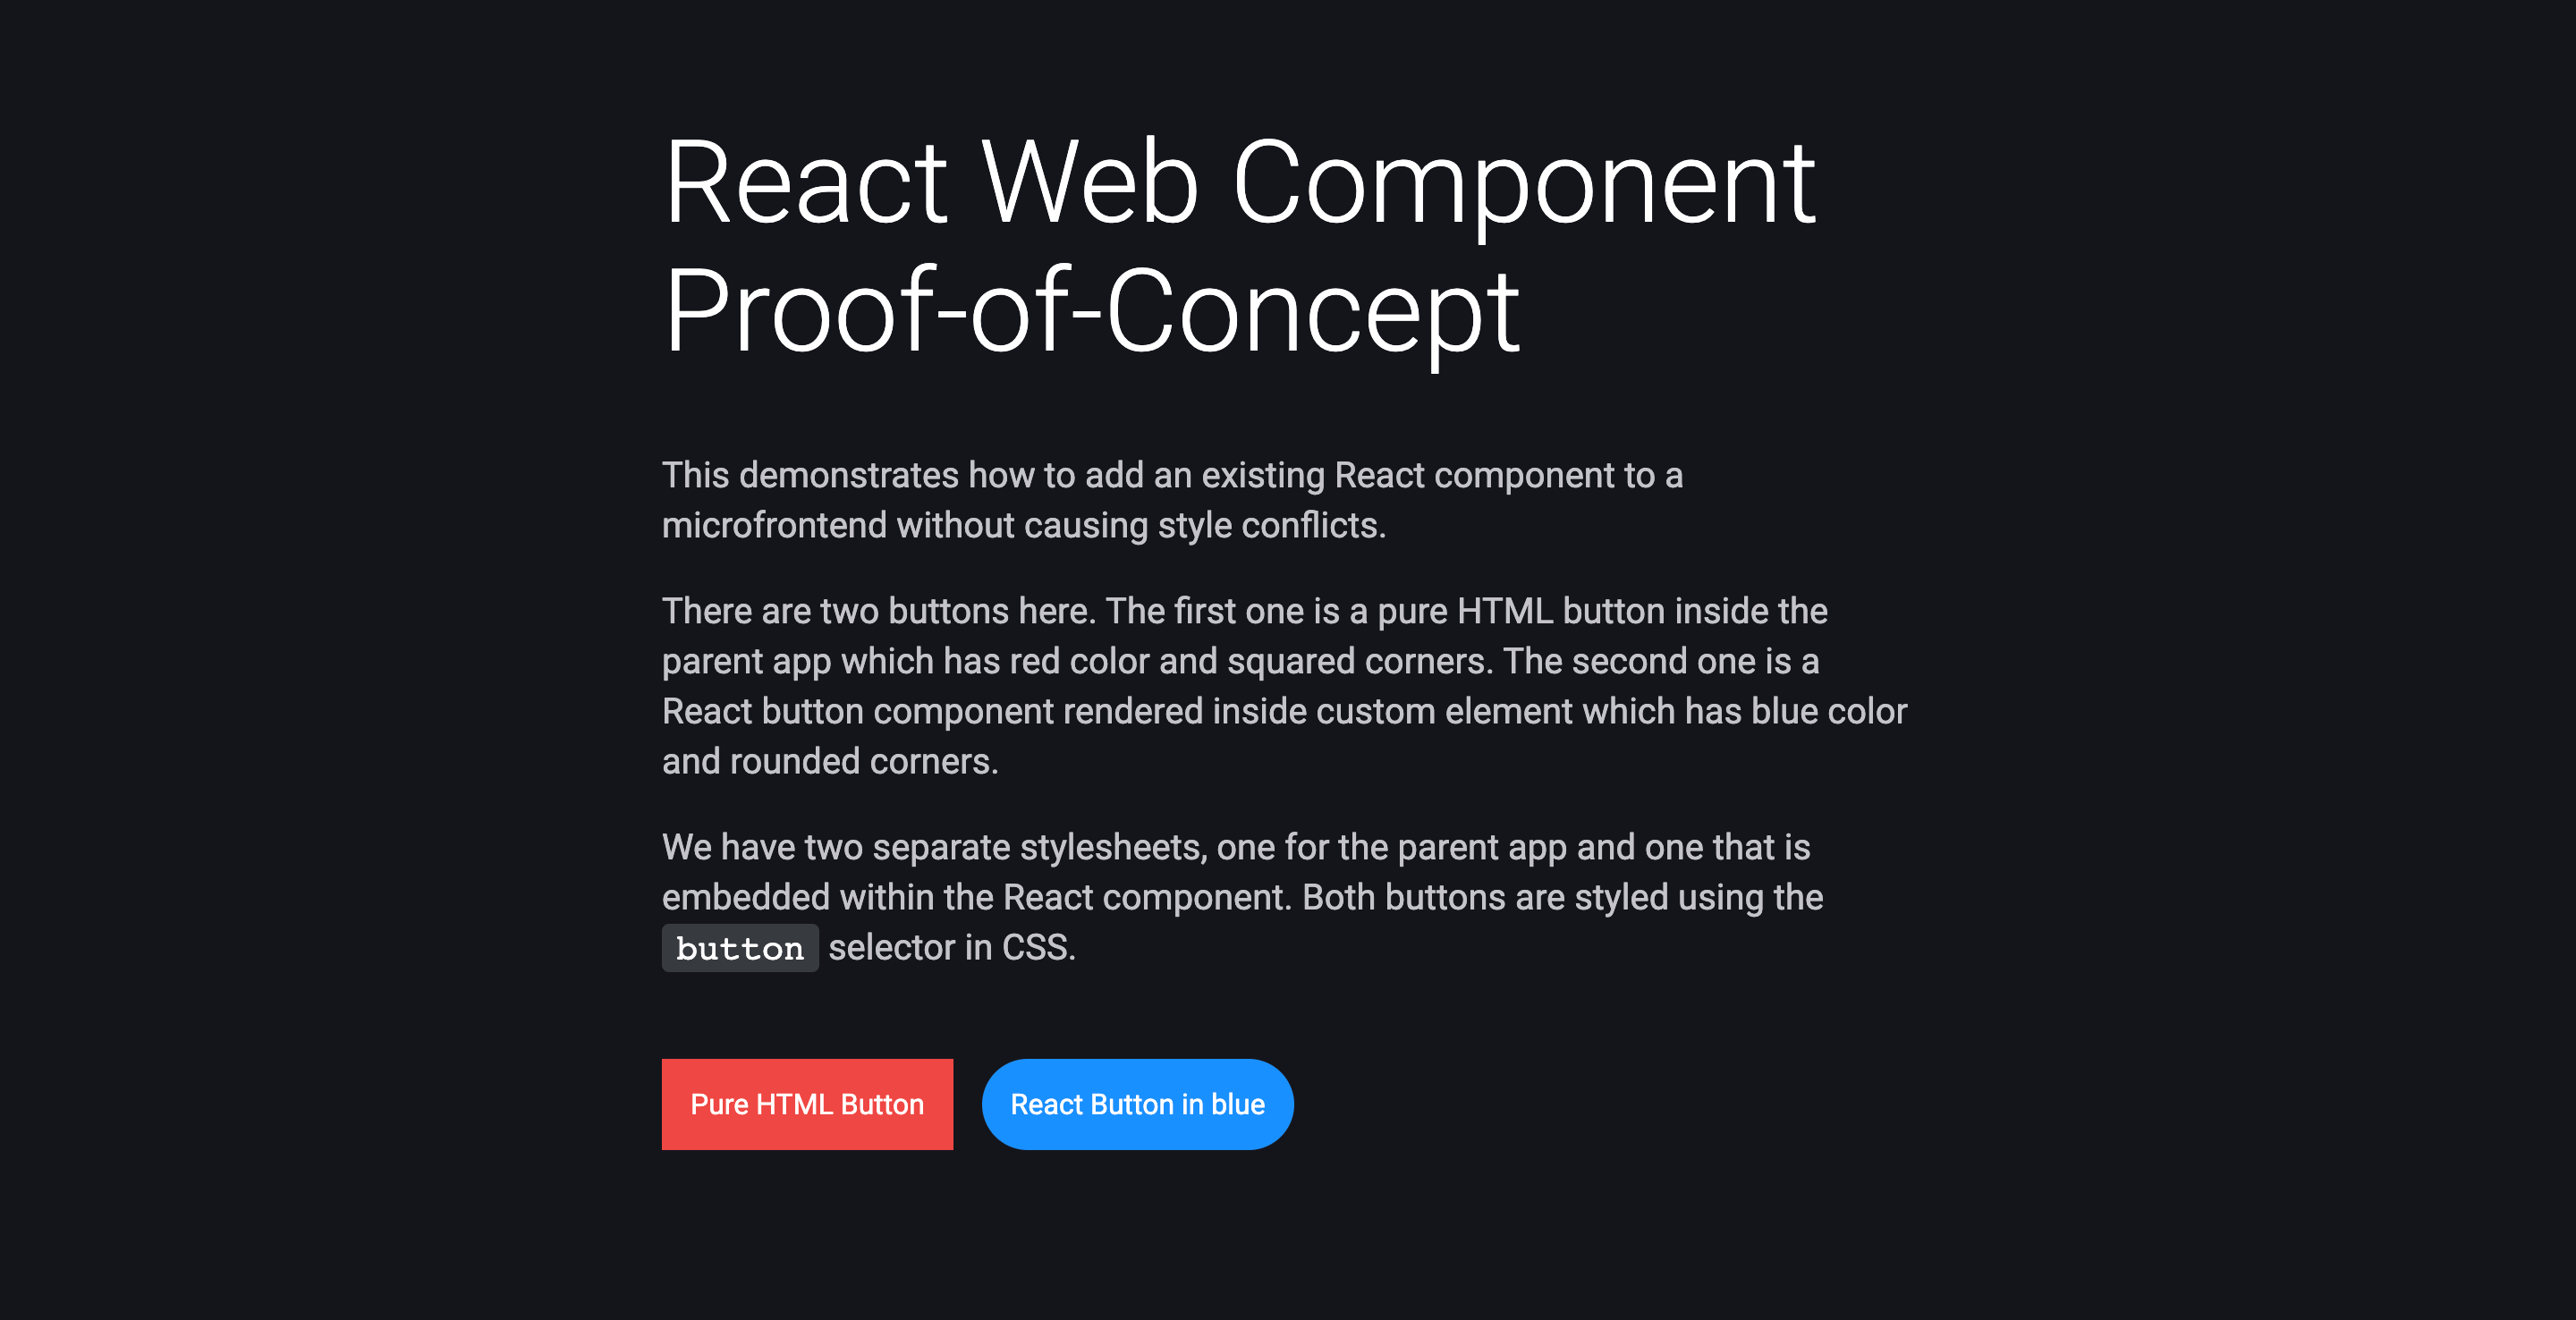 React Web Component Proof-of-Concept